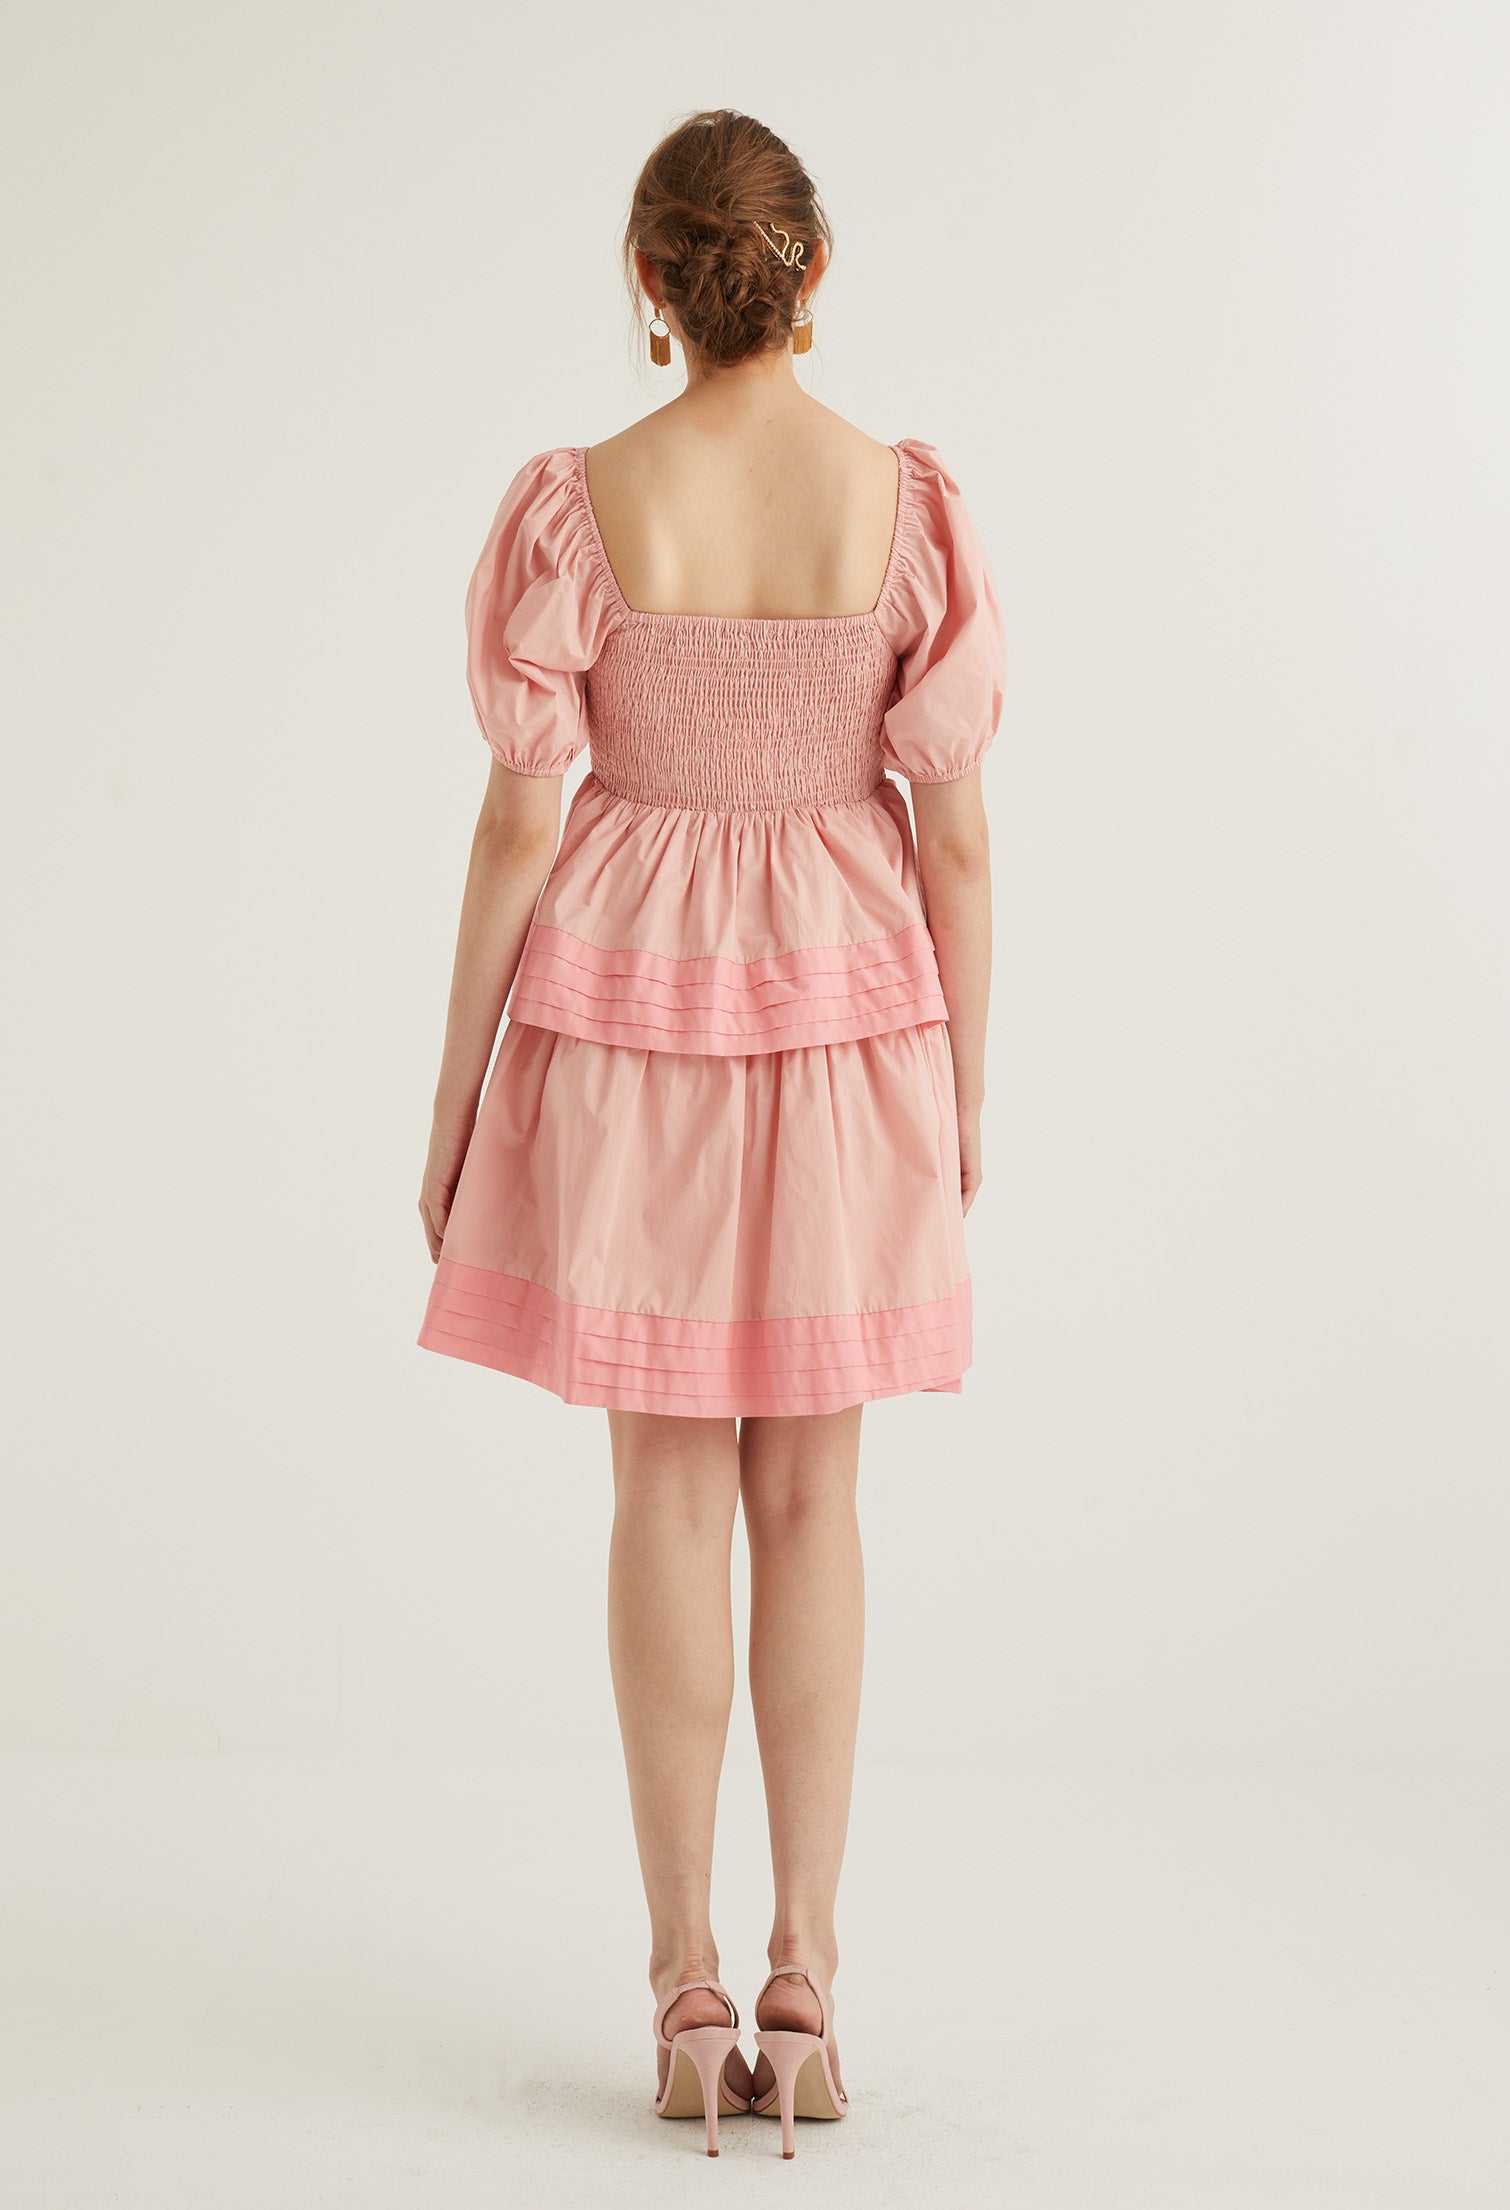 Puffed Sleeved Baby Doll Dress